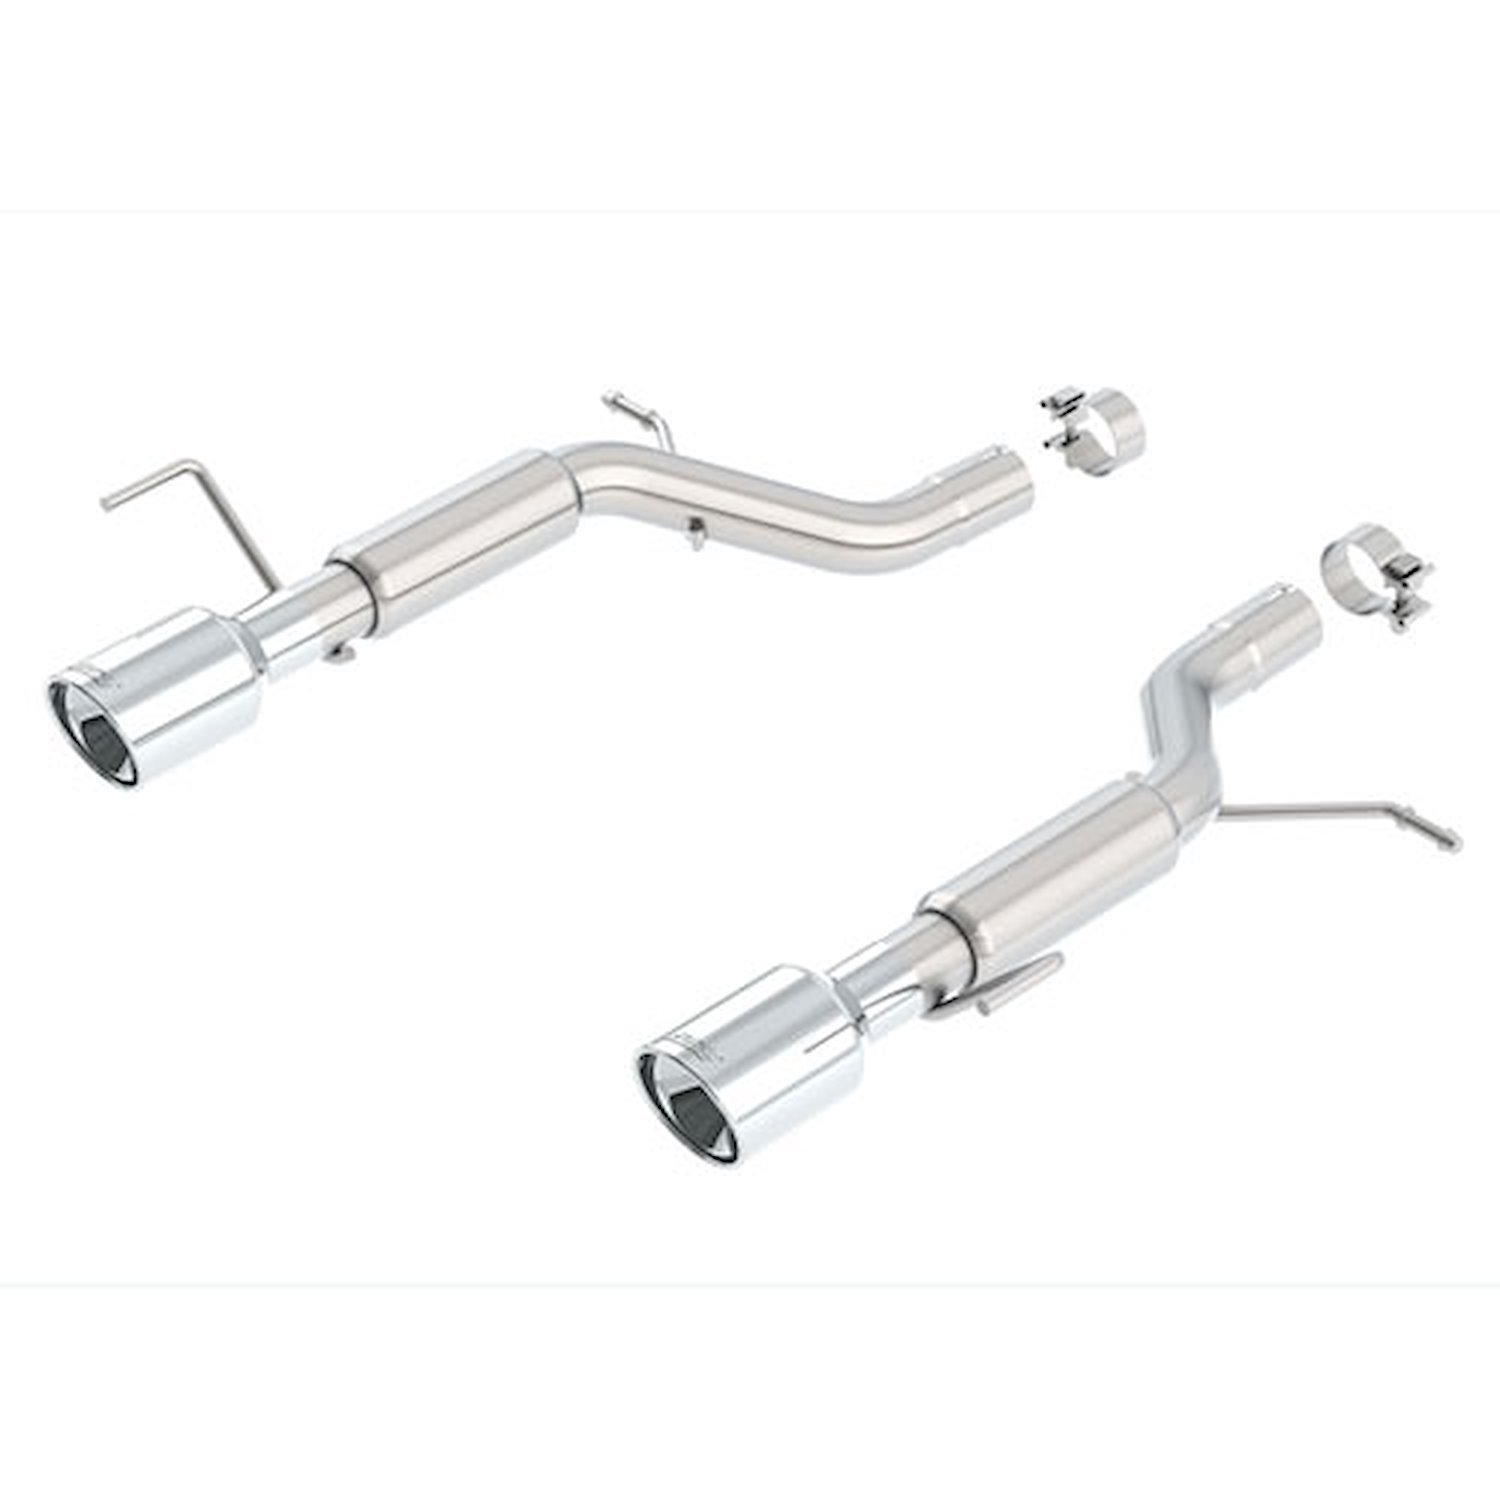 Rear-Section Exhaust System 2013-15 Cadillac ATS 2.0L Turbo